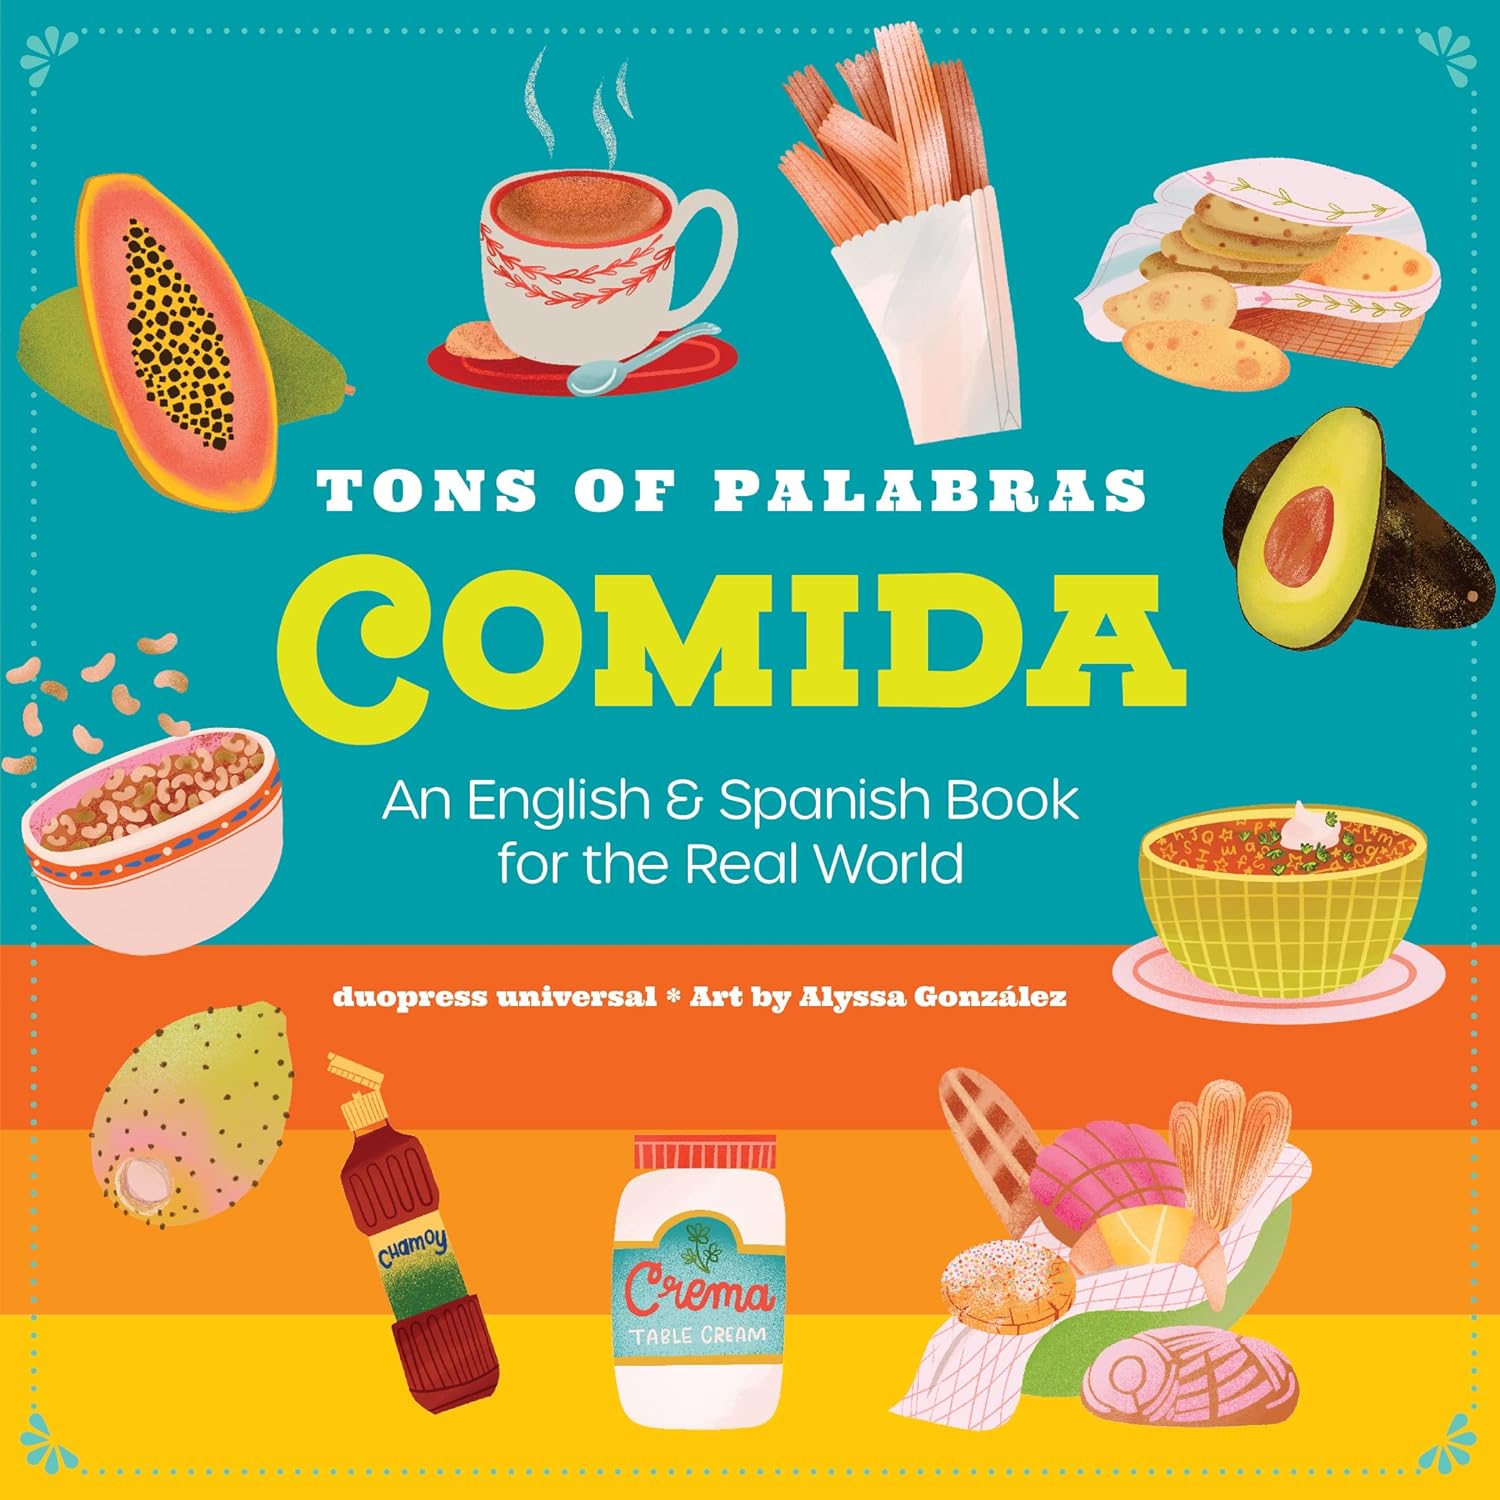 Tons of Palabras: Comida: An English & Spanish Book for kids to help them learn how words from those languages can be used each day.